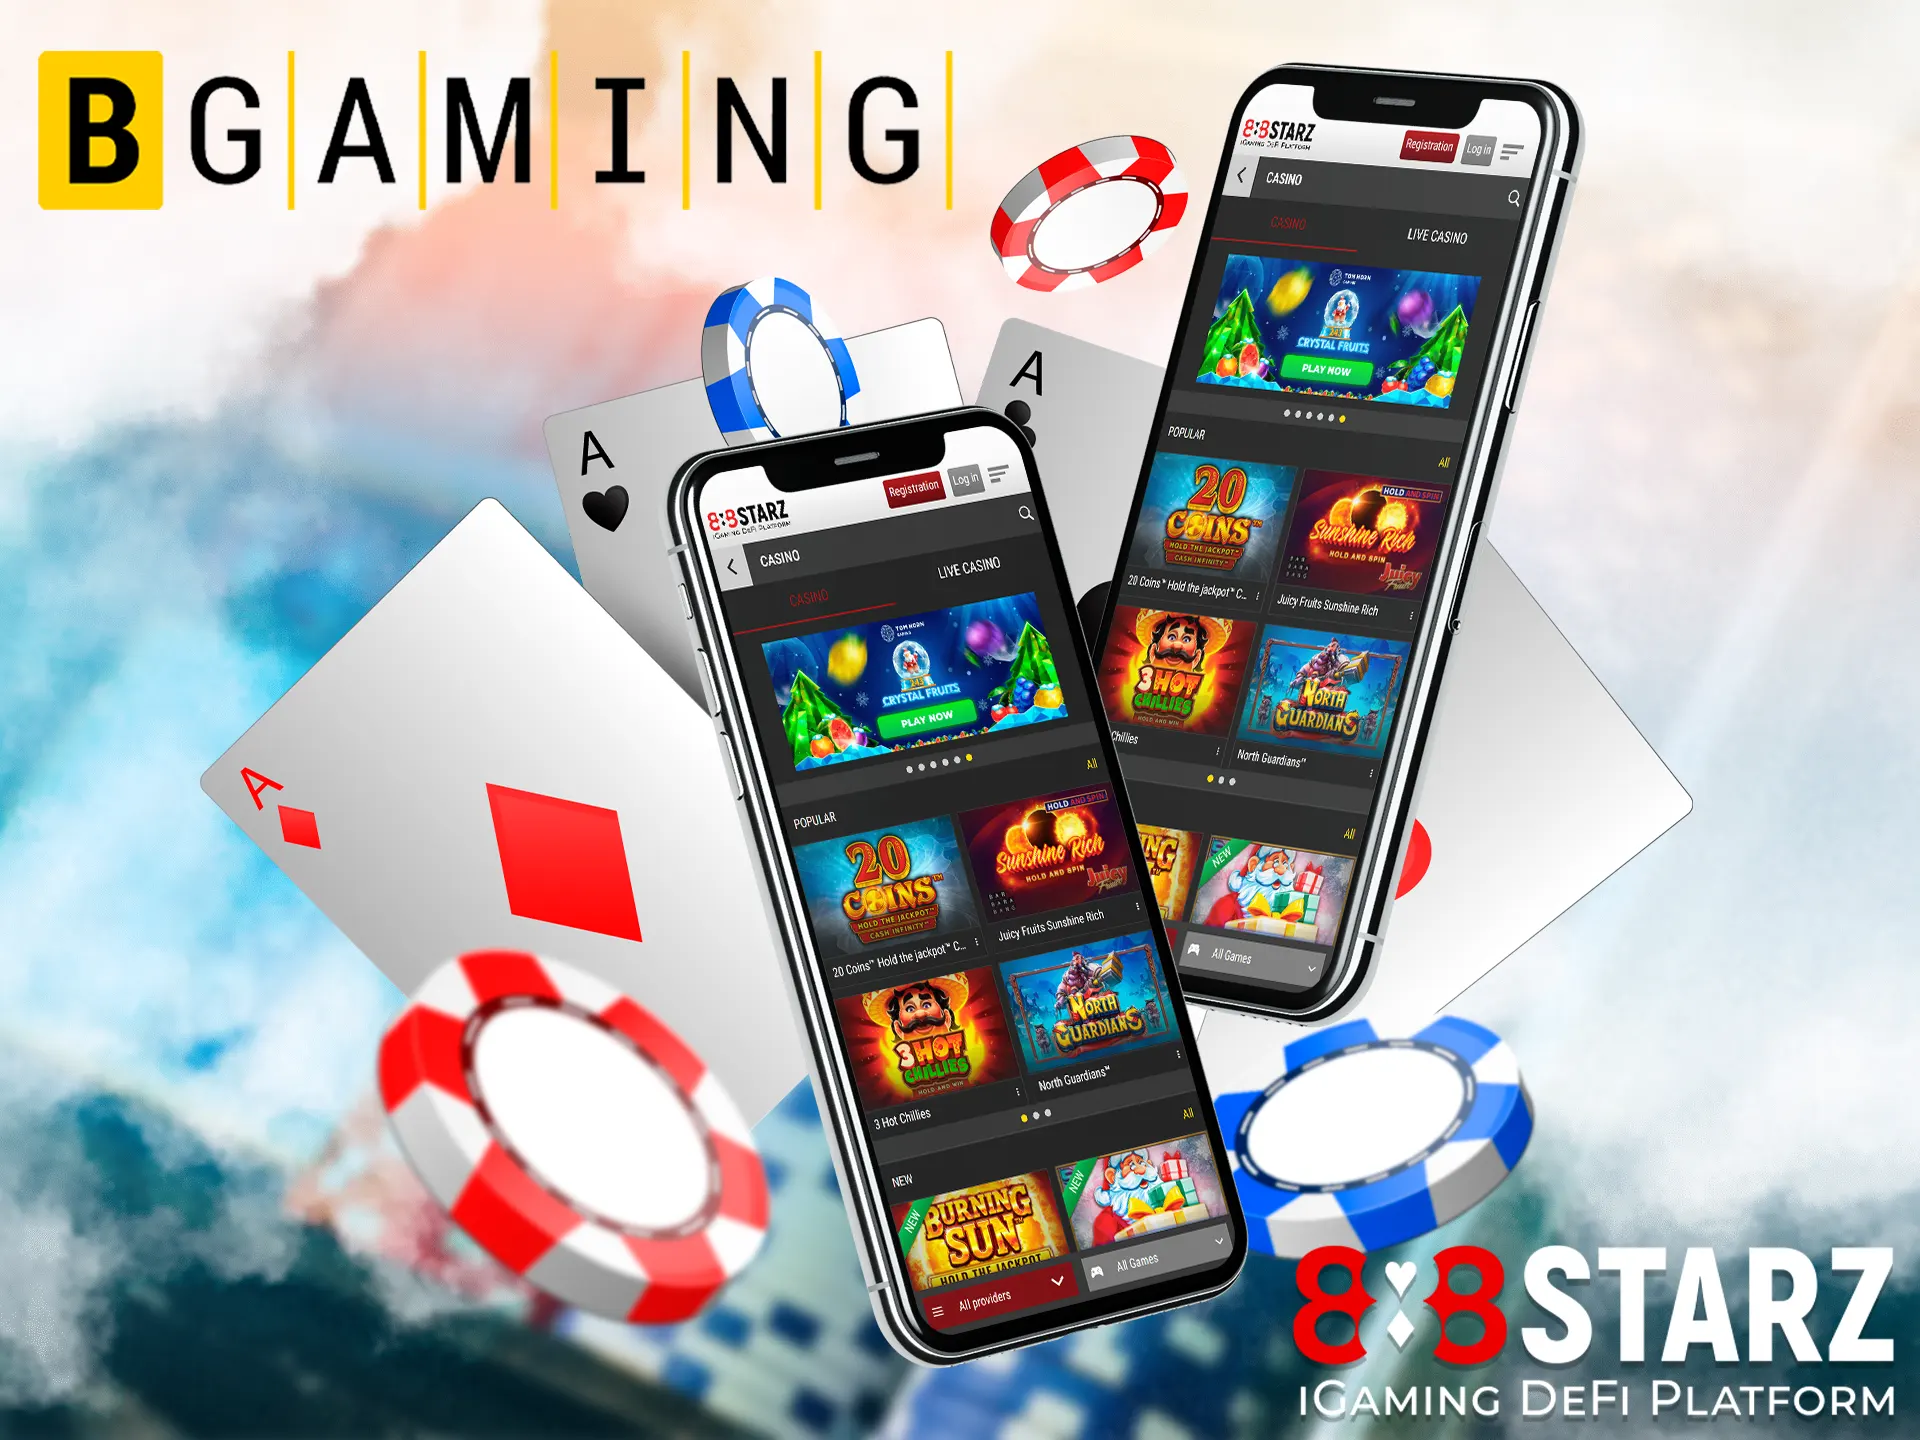 Immerse yourself in the world of quality design, high image quality, good gameplay at 888starz.